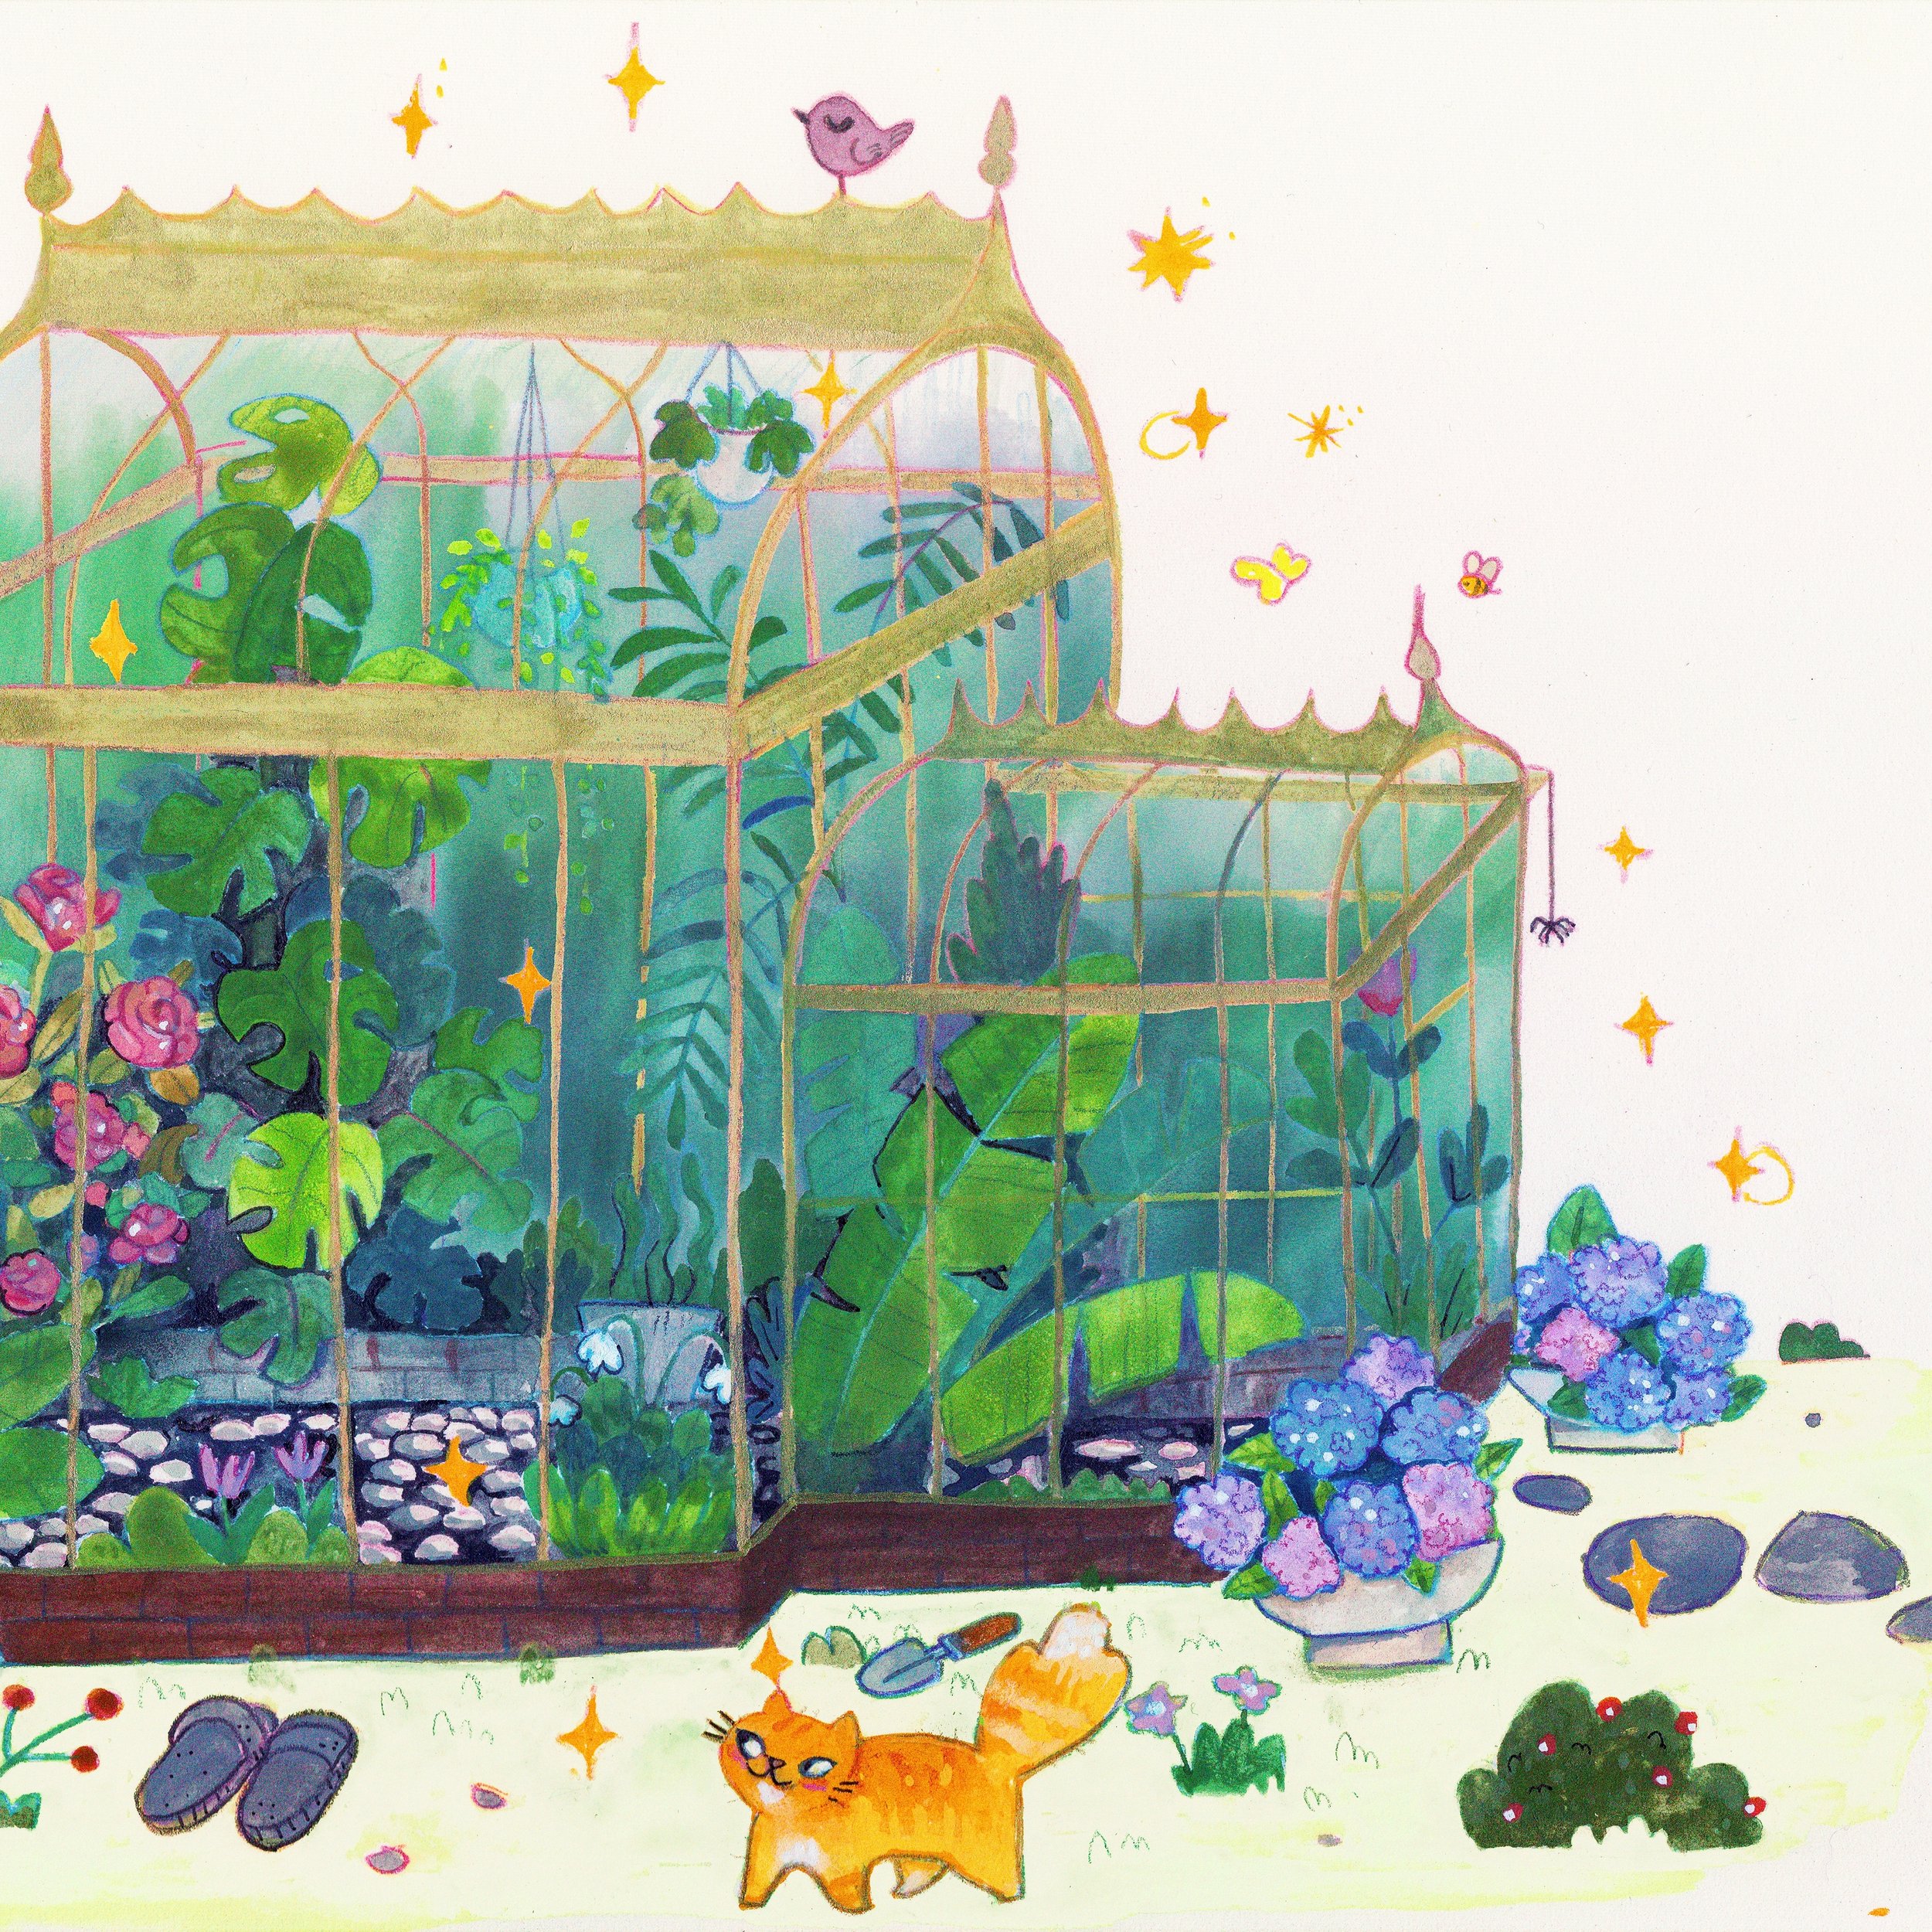 Magical greenhouse ✨🌱 Making ready new prints is always fun ! 🤩

#illustration #drawing #childrenillustration #greenhouse #plants